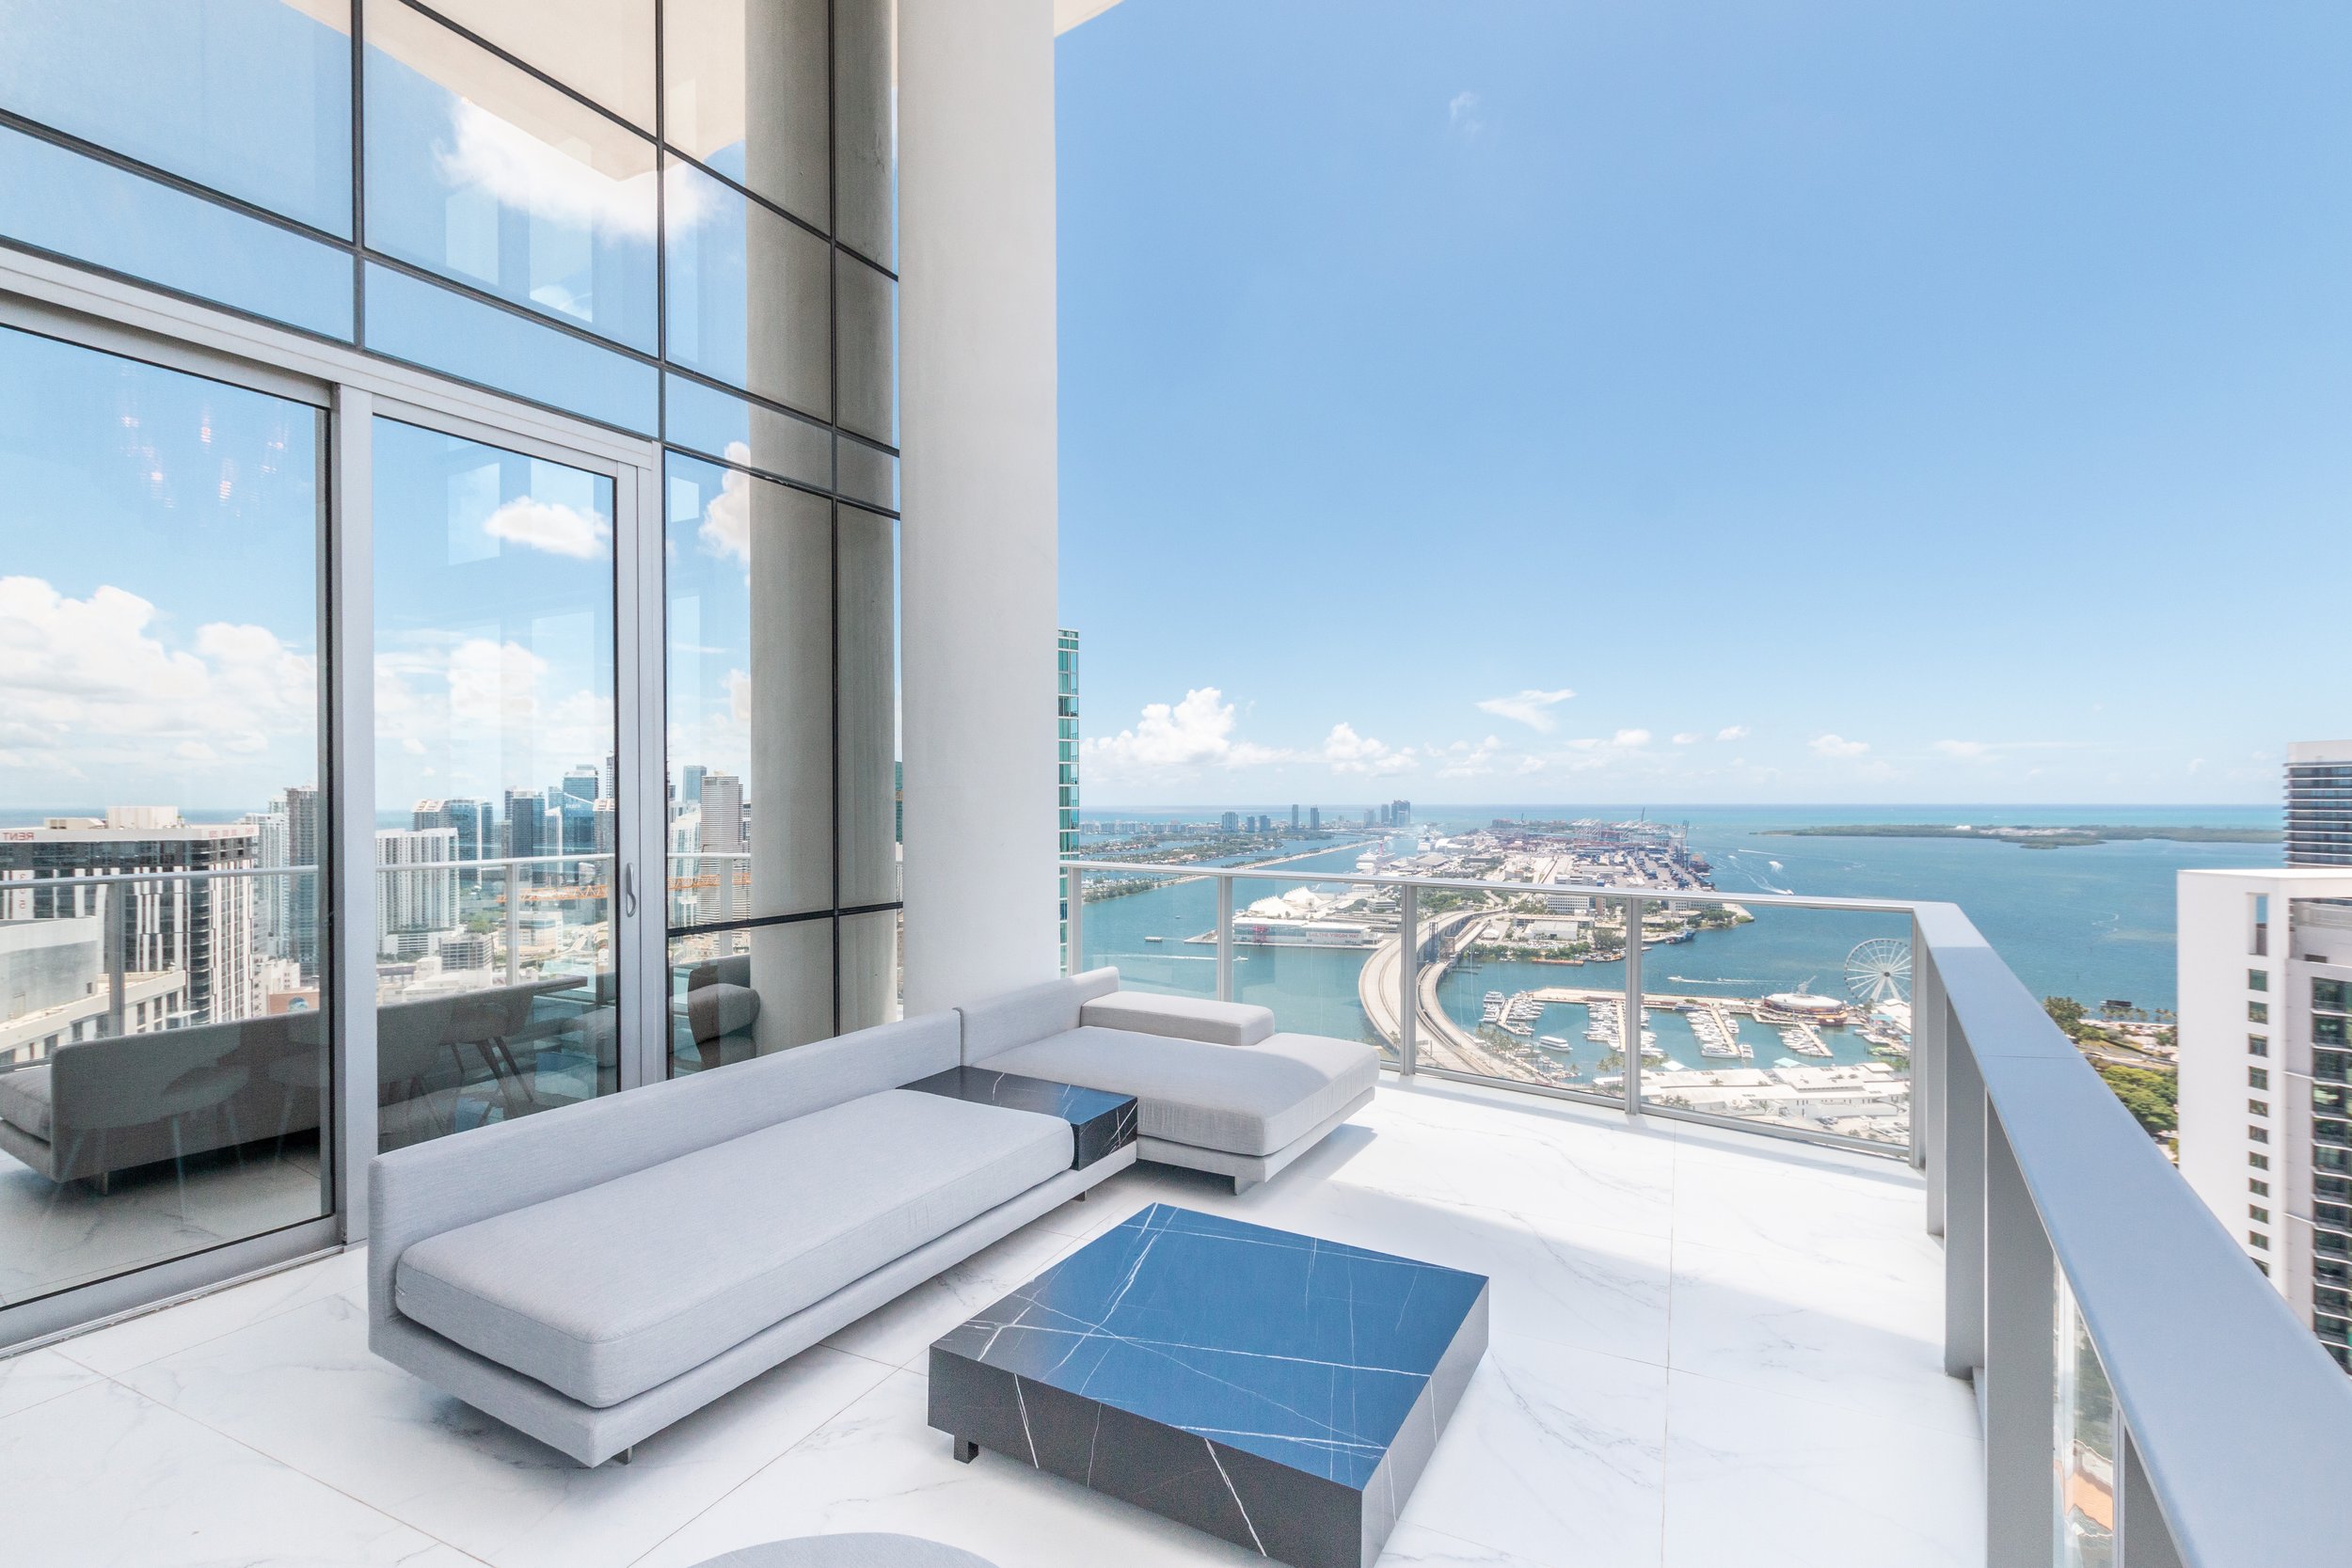 Step Inside A Sky-High Ultra-Luxe Penthouse At PARAMOUNT Miami Worldcenter For Rent Asking $40K Per Month ALTARA Properties Scott Lawrence Porter 1.32.jpg